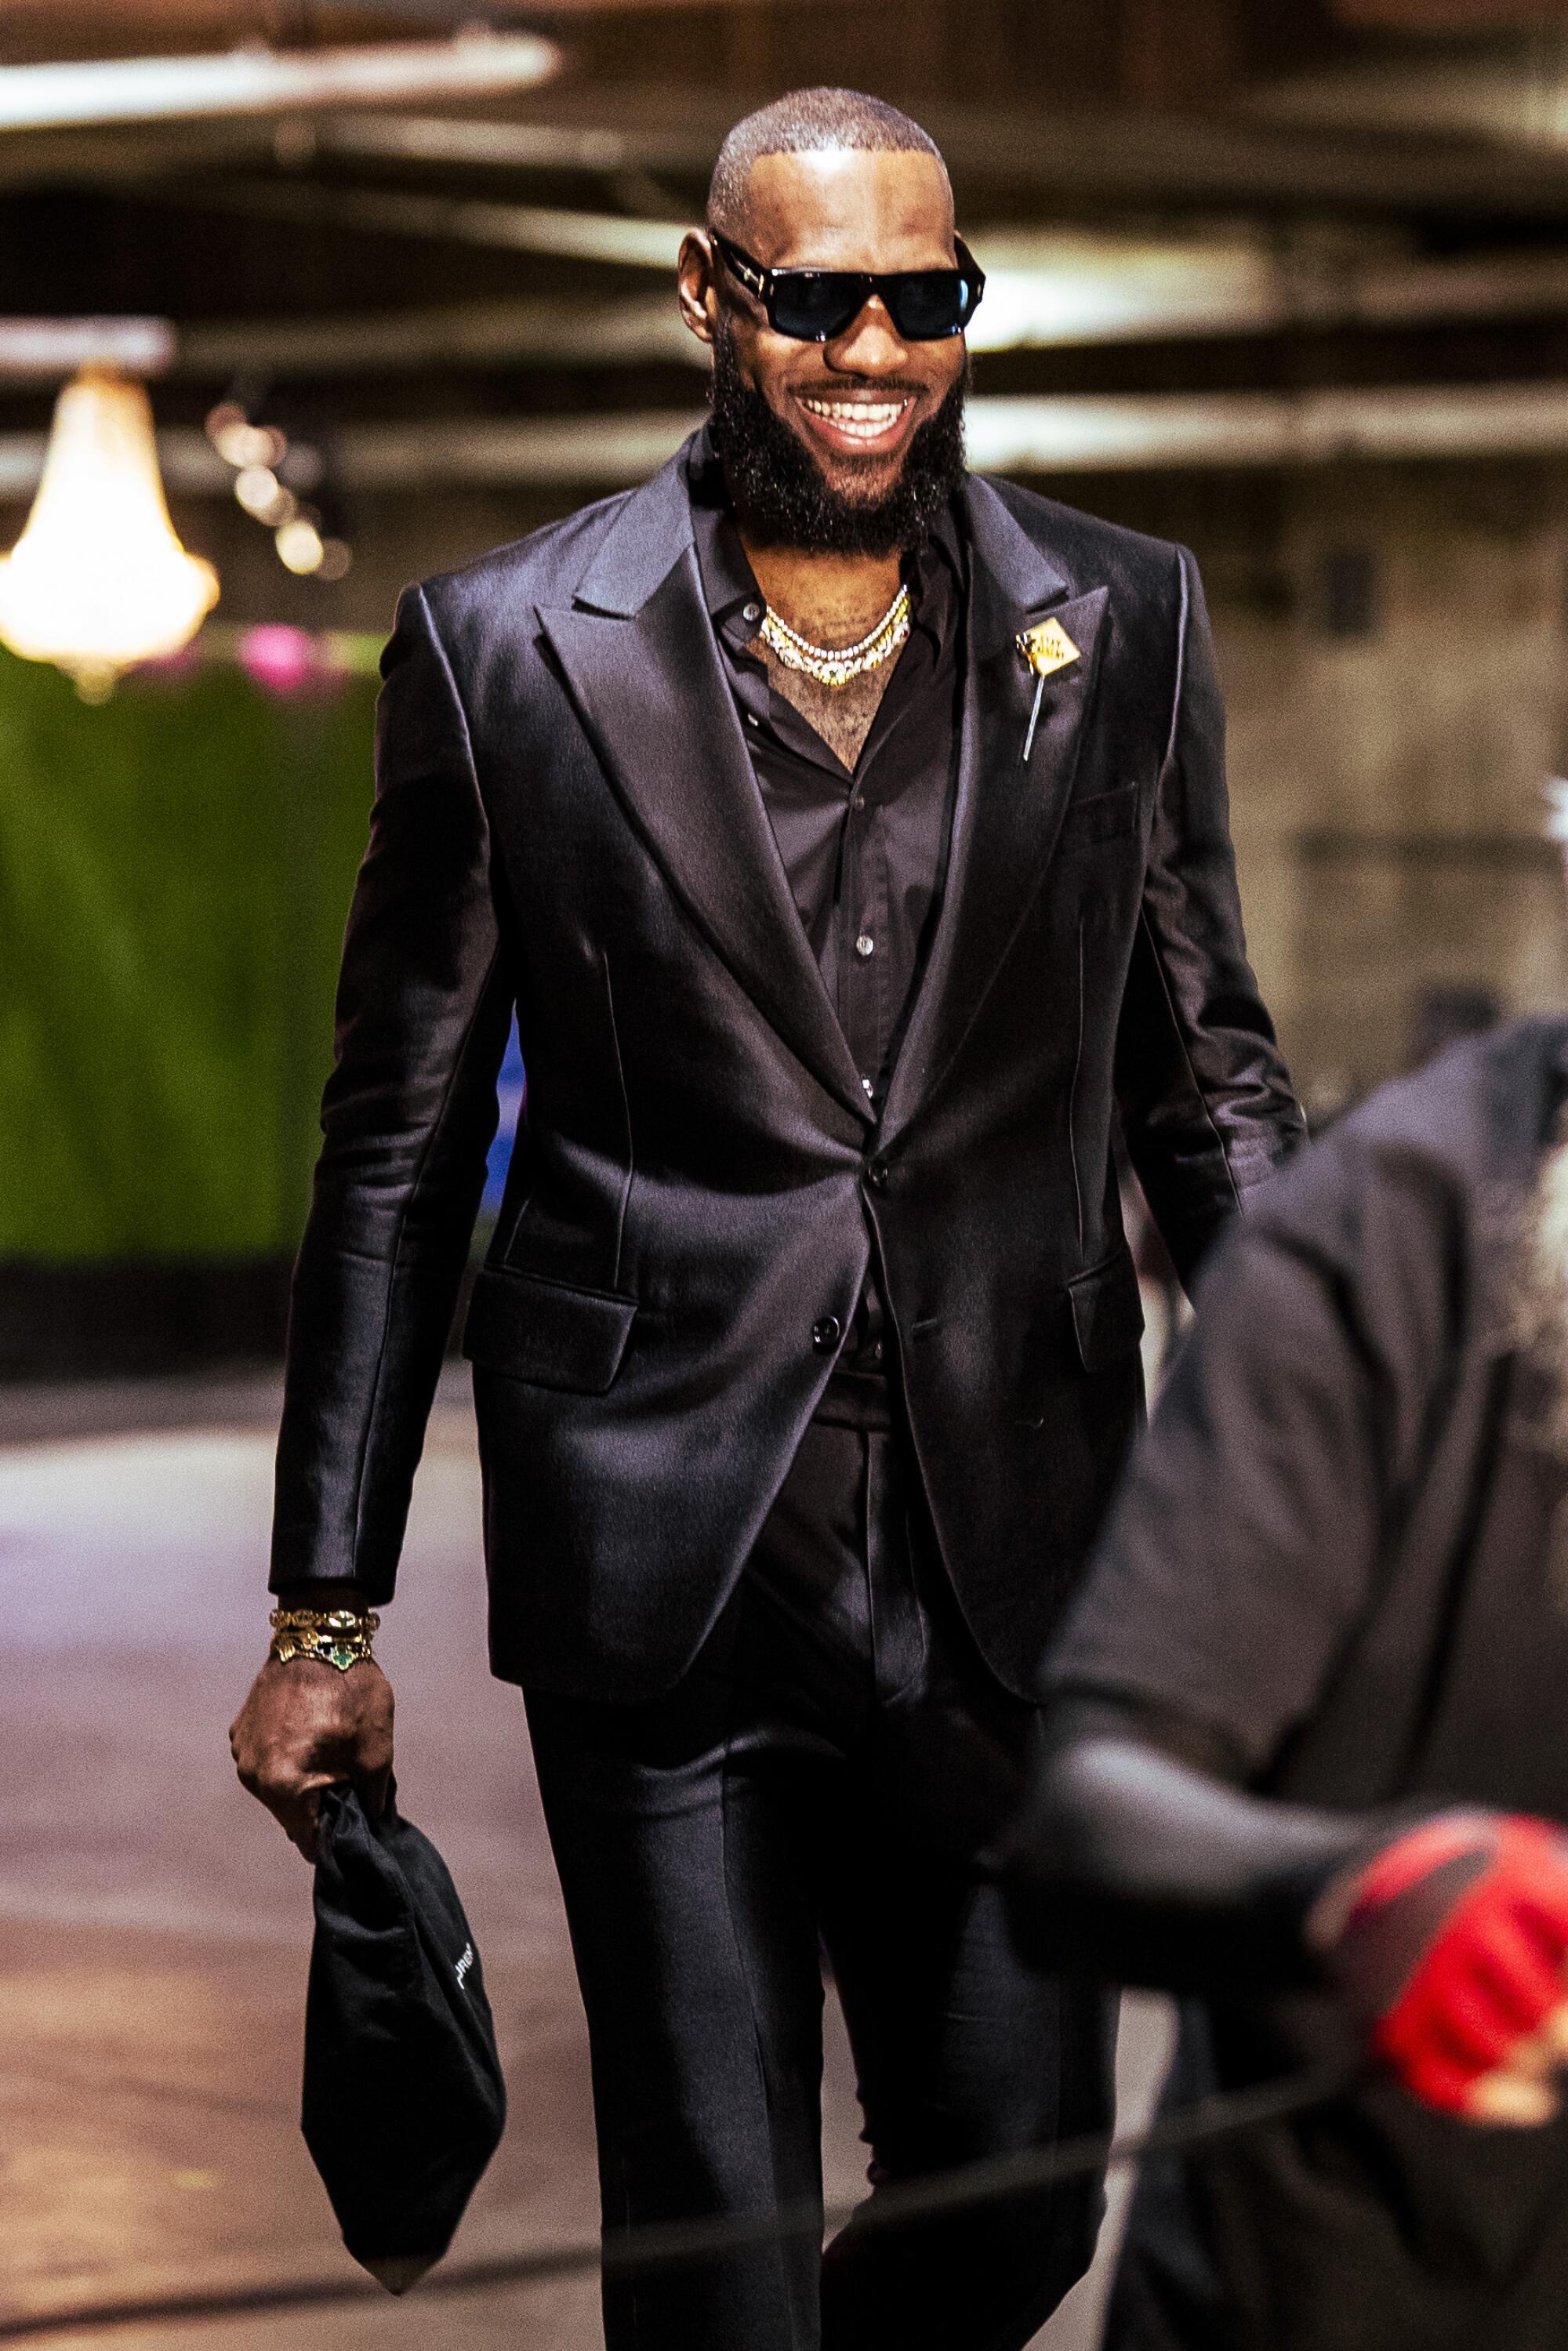 LeBron James arrives at Crypto.com Arena in a black suit for the Lakers' game Tuesday night against the Thunder.